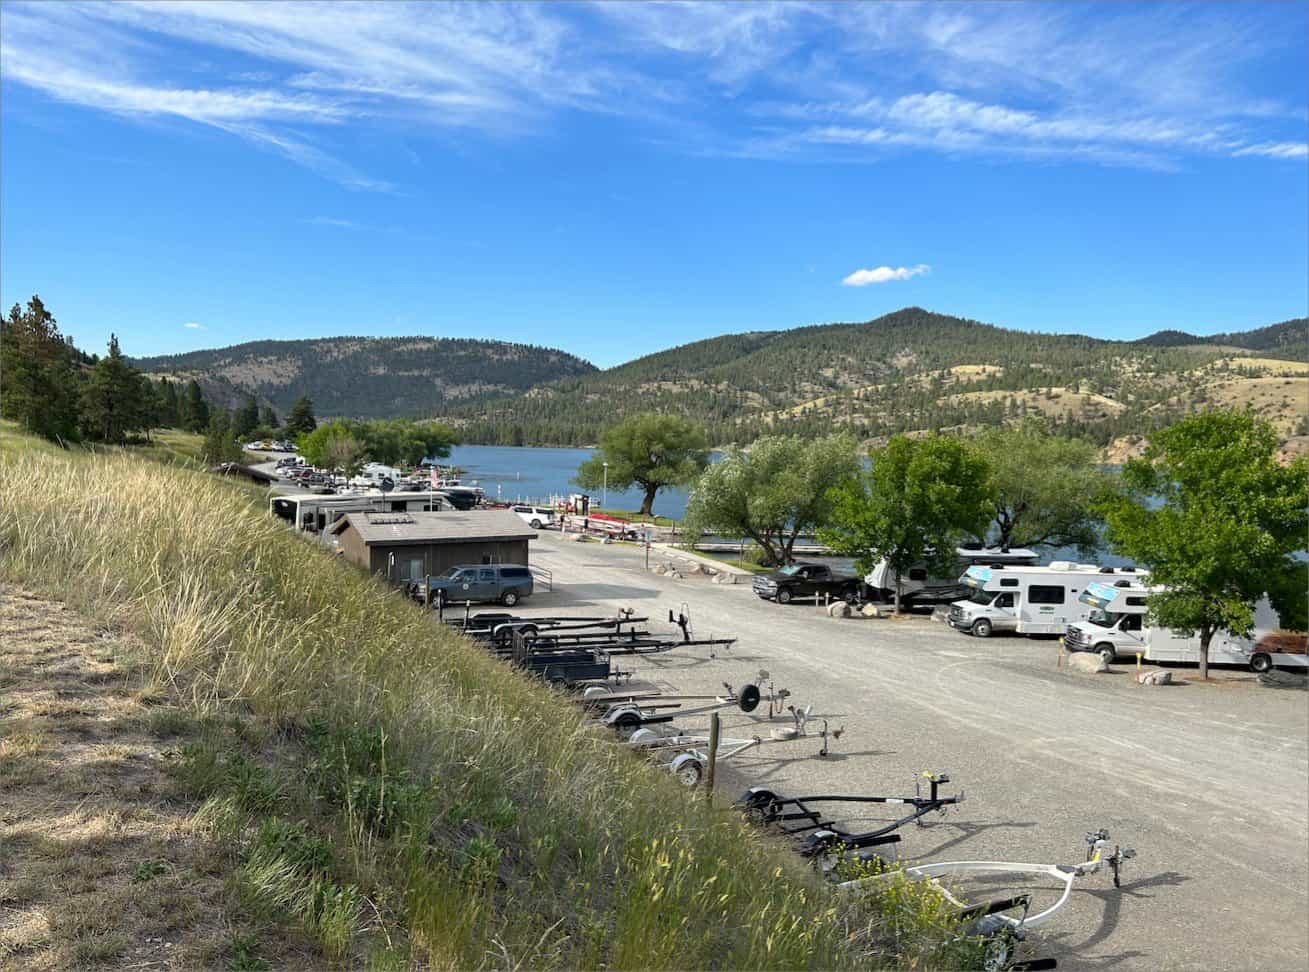 Recreational vehicles parked near a lake with boat trailers in the foreground and hills in the distance, at Black Sandy State Park, Montana.